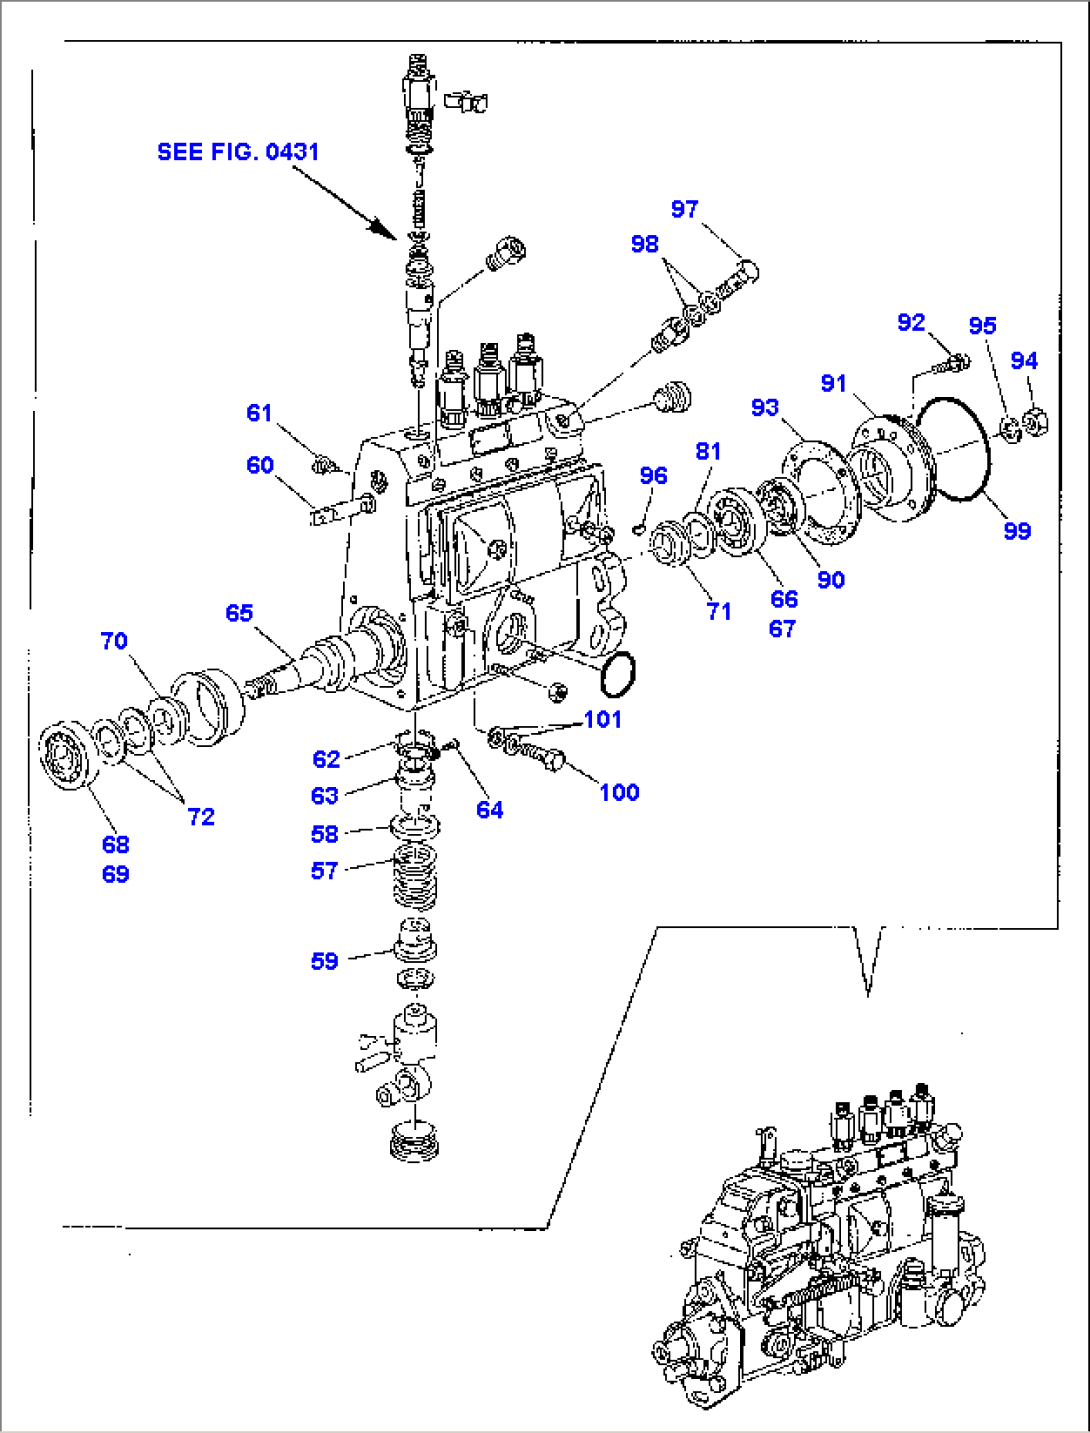 FUEL INJECTION PUMP (2/2)